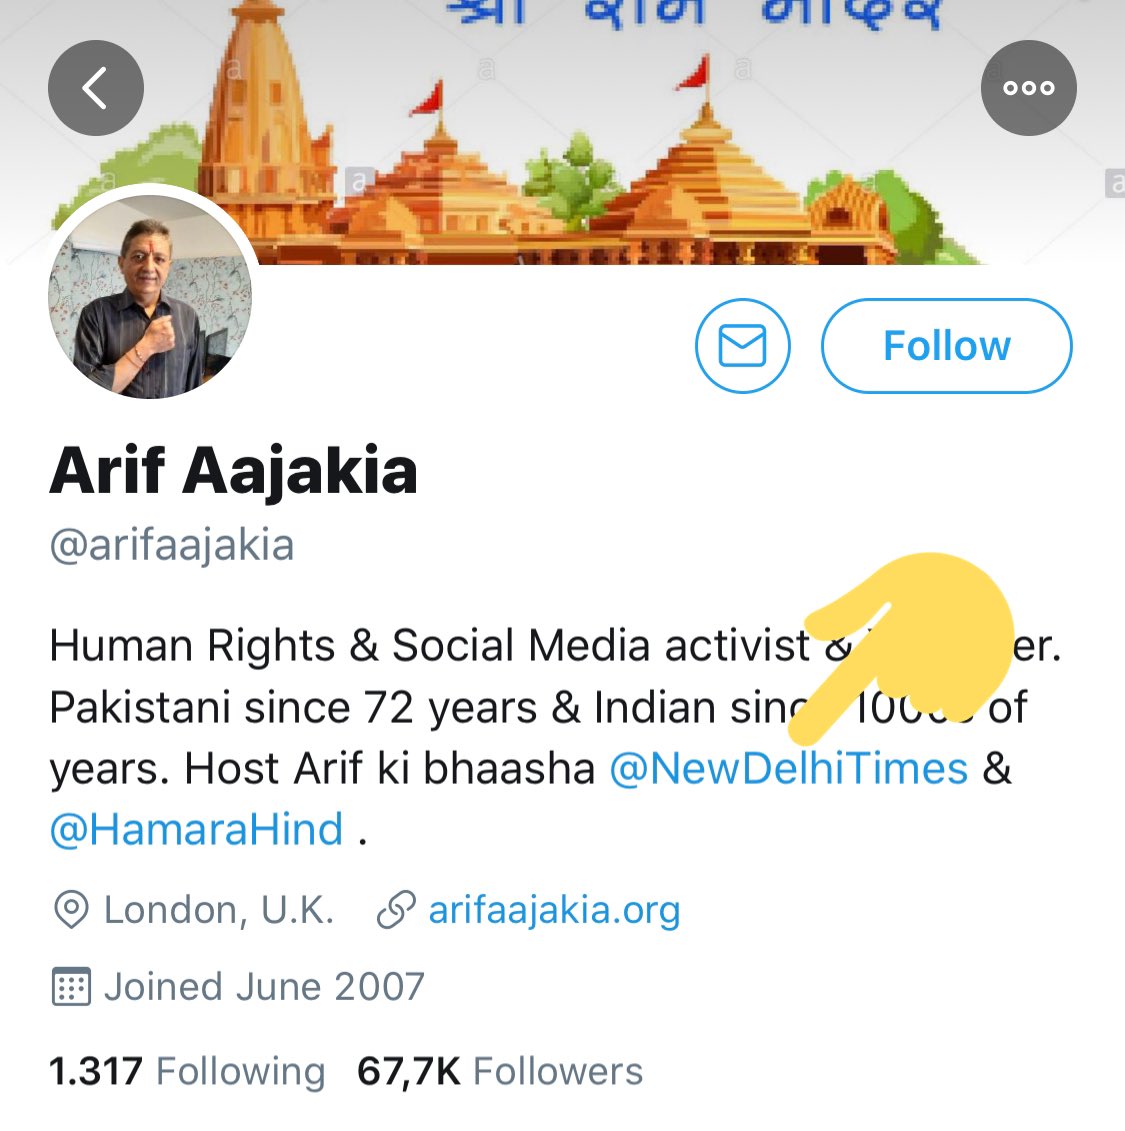 Before we go to explanation, if you’re still in doubt on India propaganda cells behind these trends in Pakistan.Here’s some mainstream Indian accounts using this incident to spread propaganda against Pakistan’s law enforcement agencies with simple objective to hurt  #CPEC./2